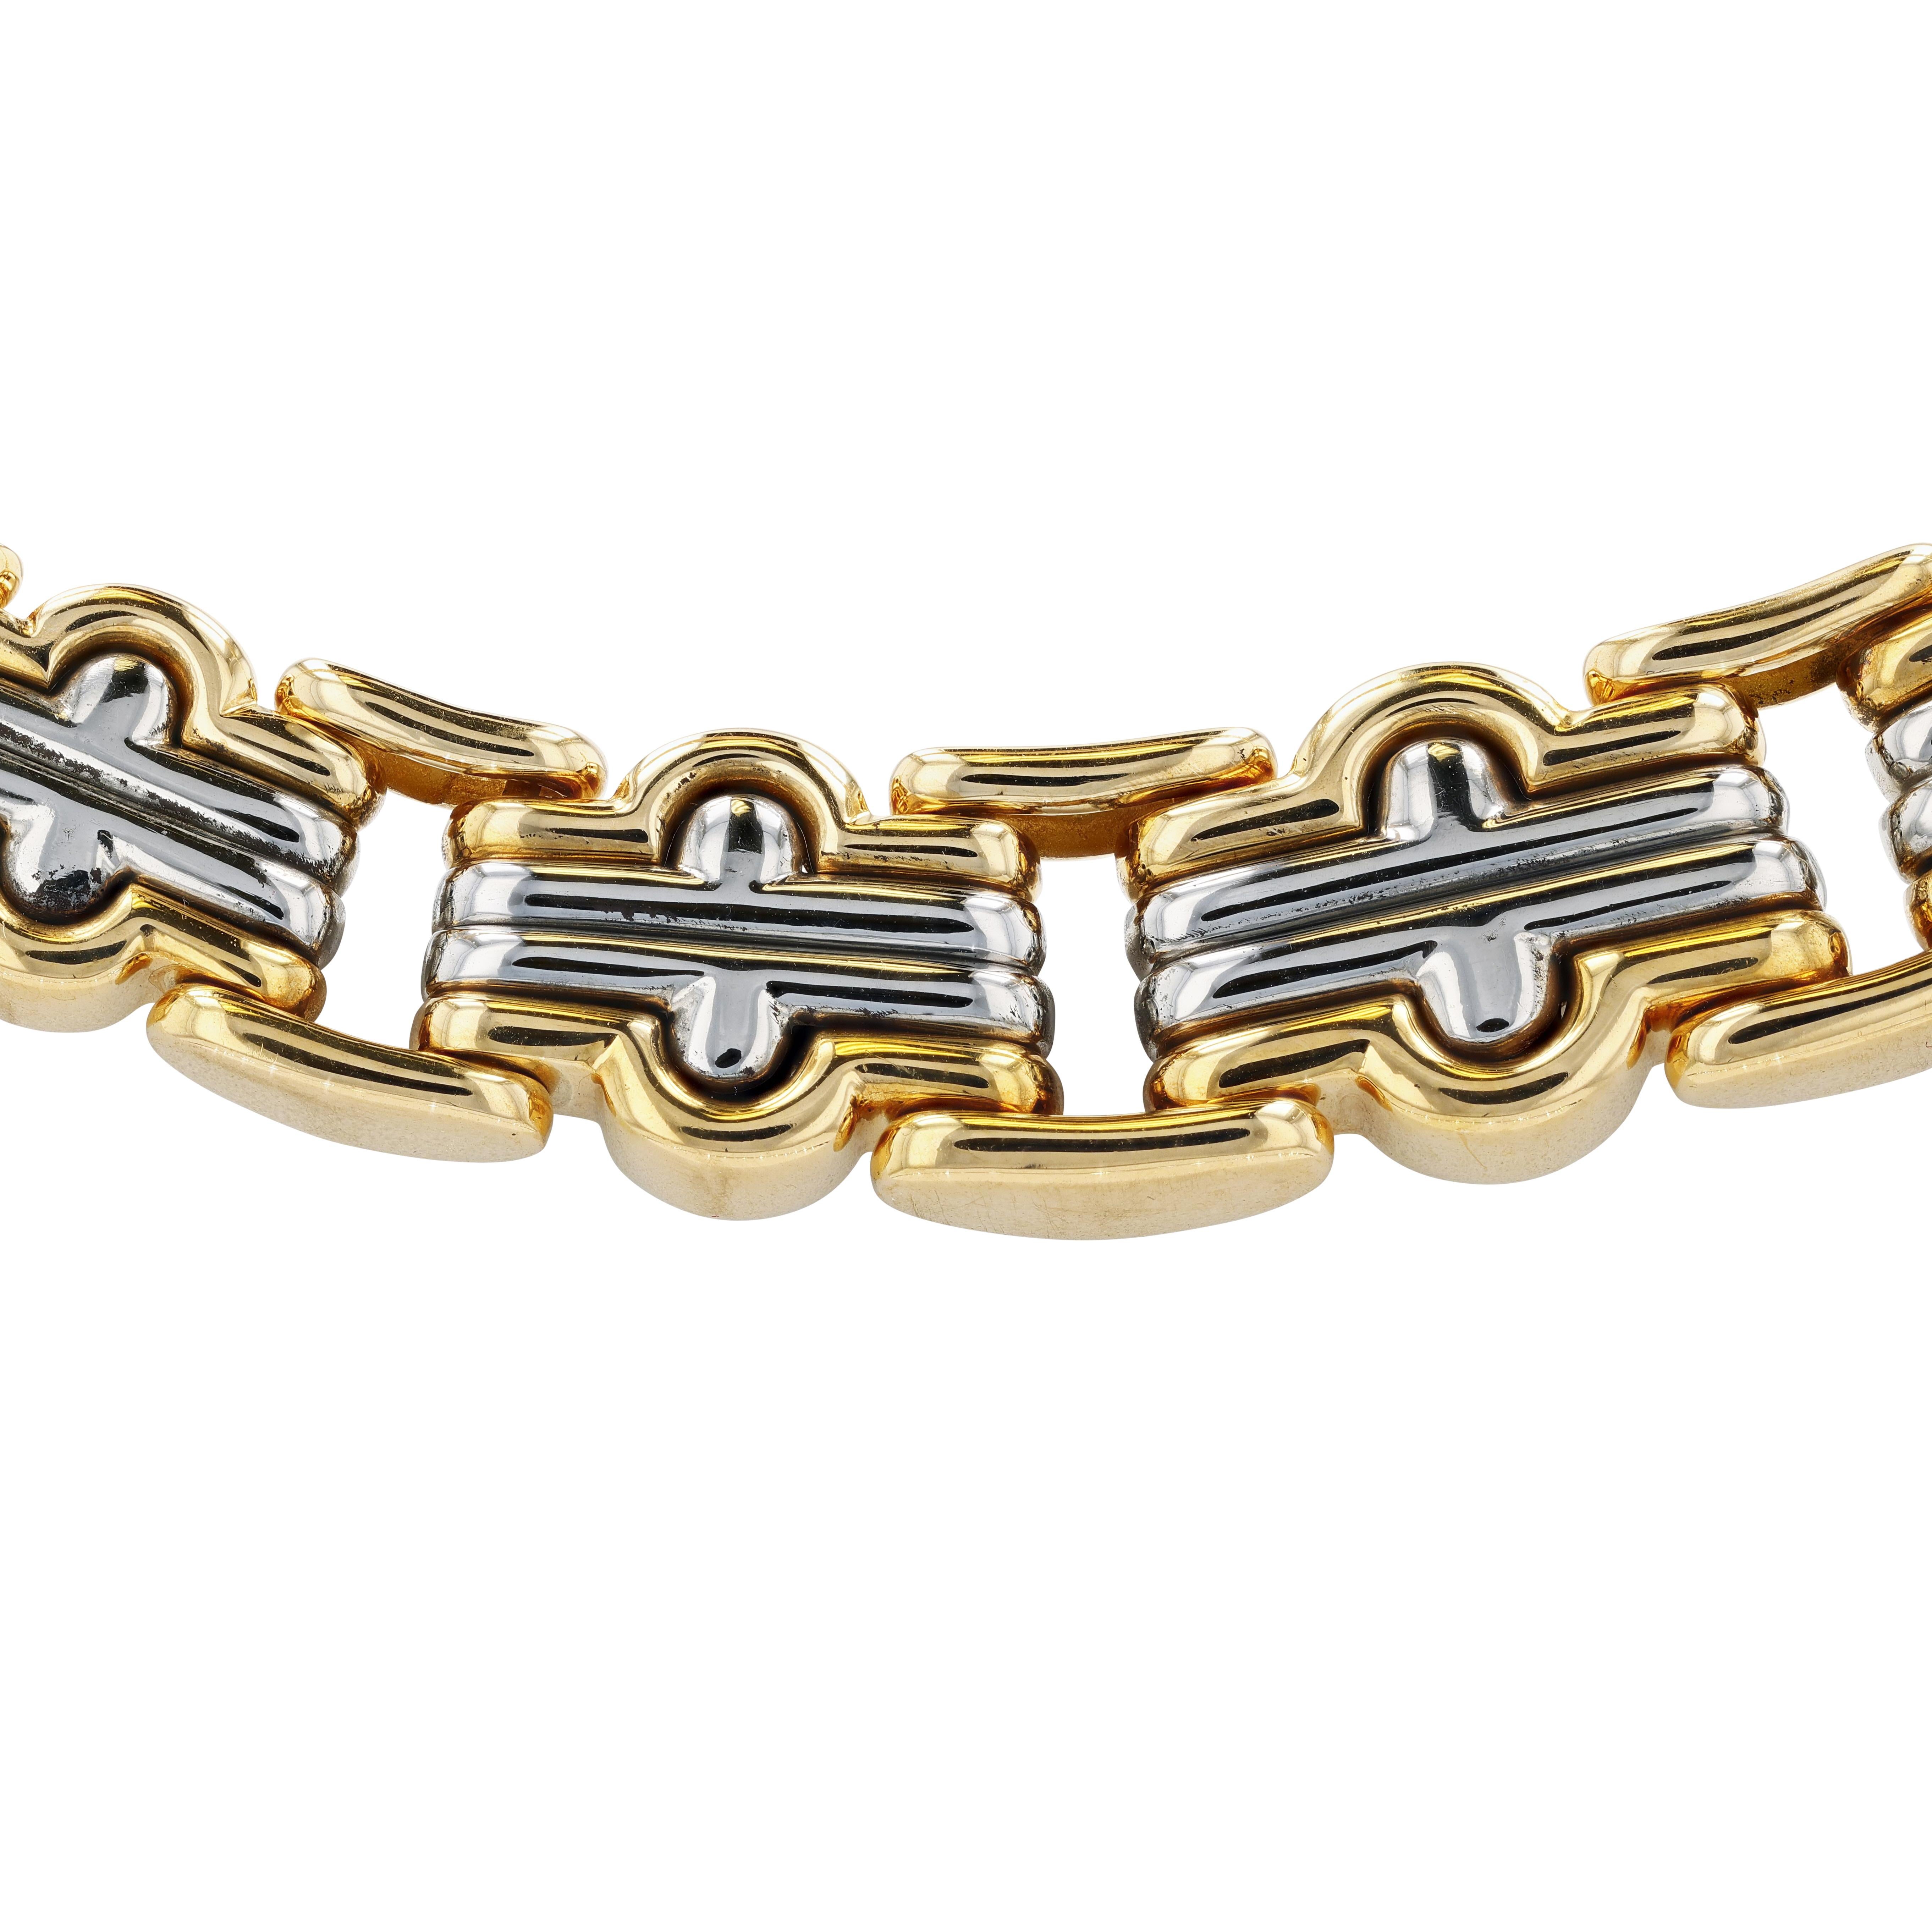 Bulgari Parentessi 18k yellow gold and stainless steel necklace featuring graduated links front to back with high polished finish and safety clasp. Signed Bulgari. Inner circumference 38.5 cm. 